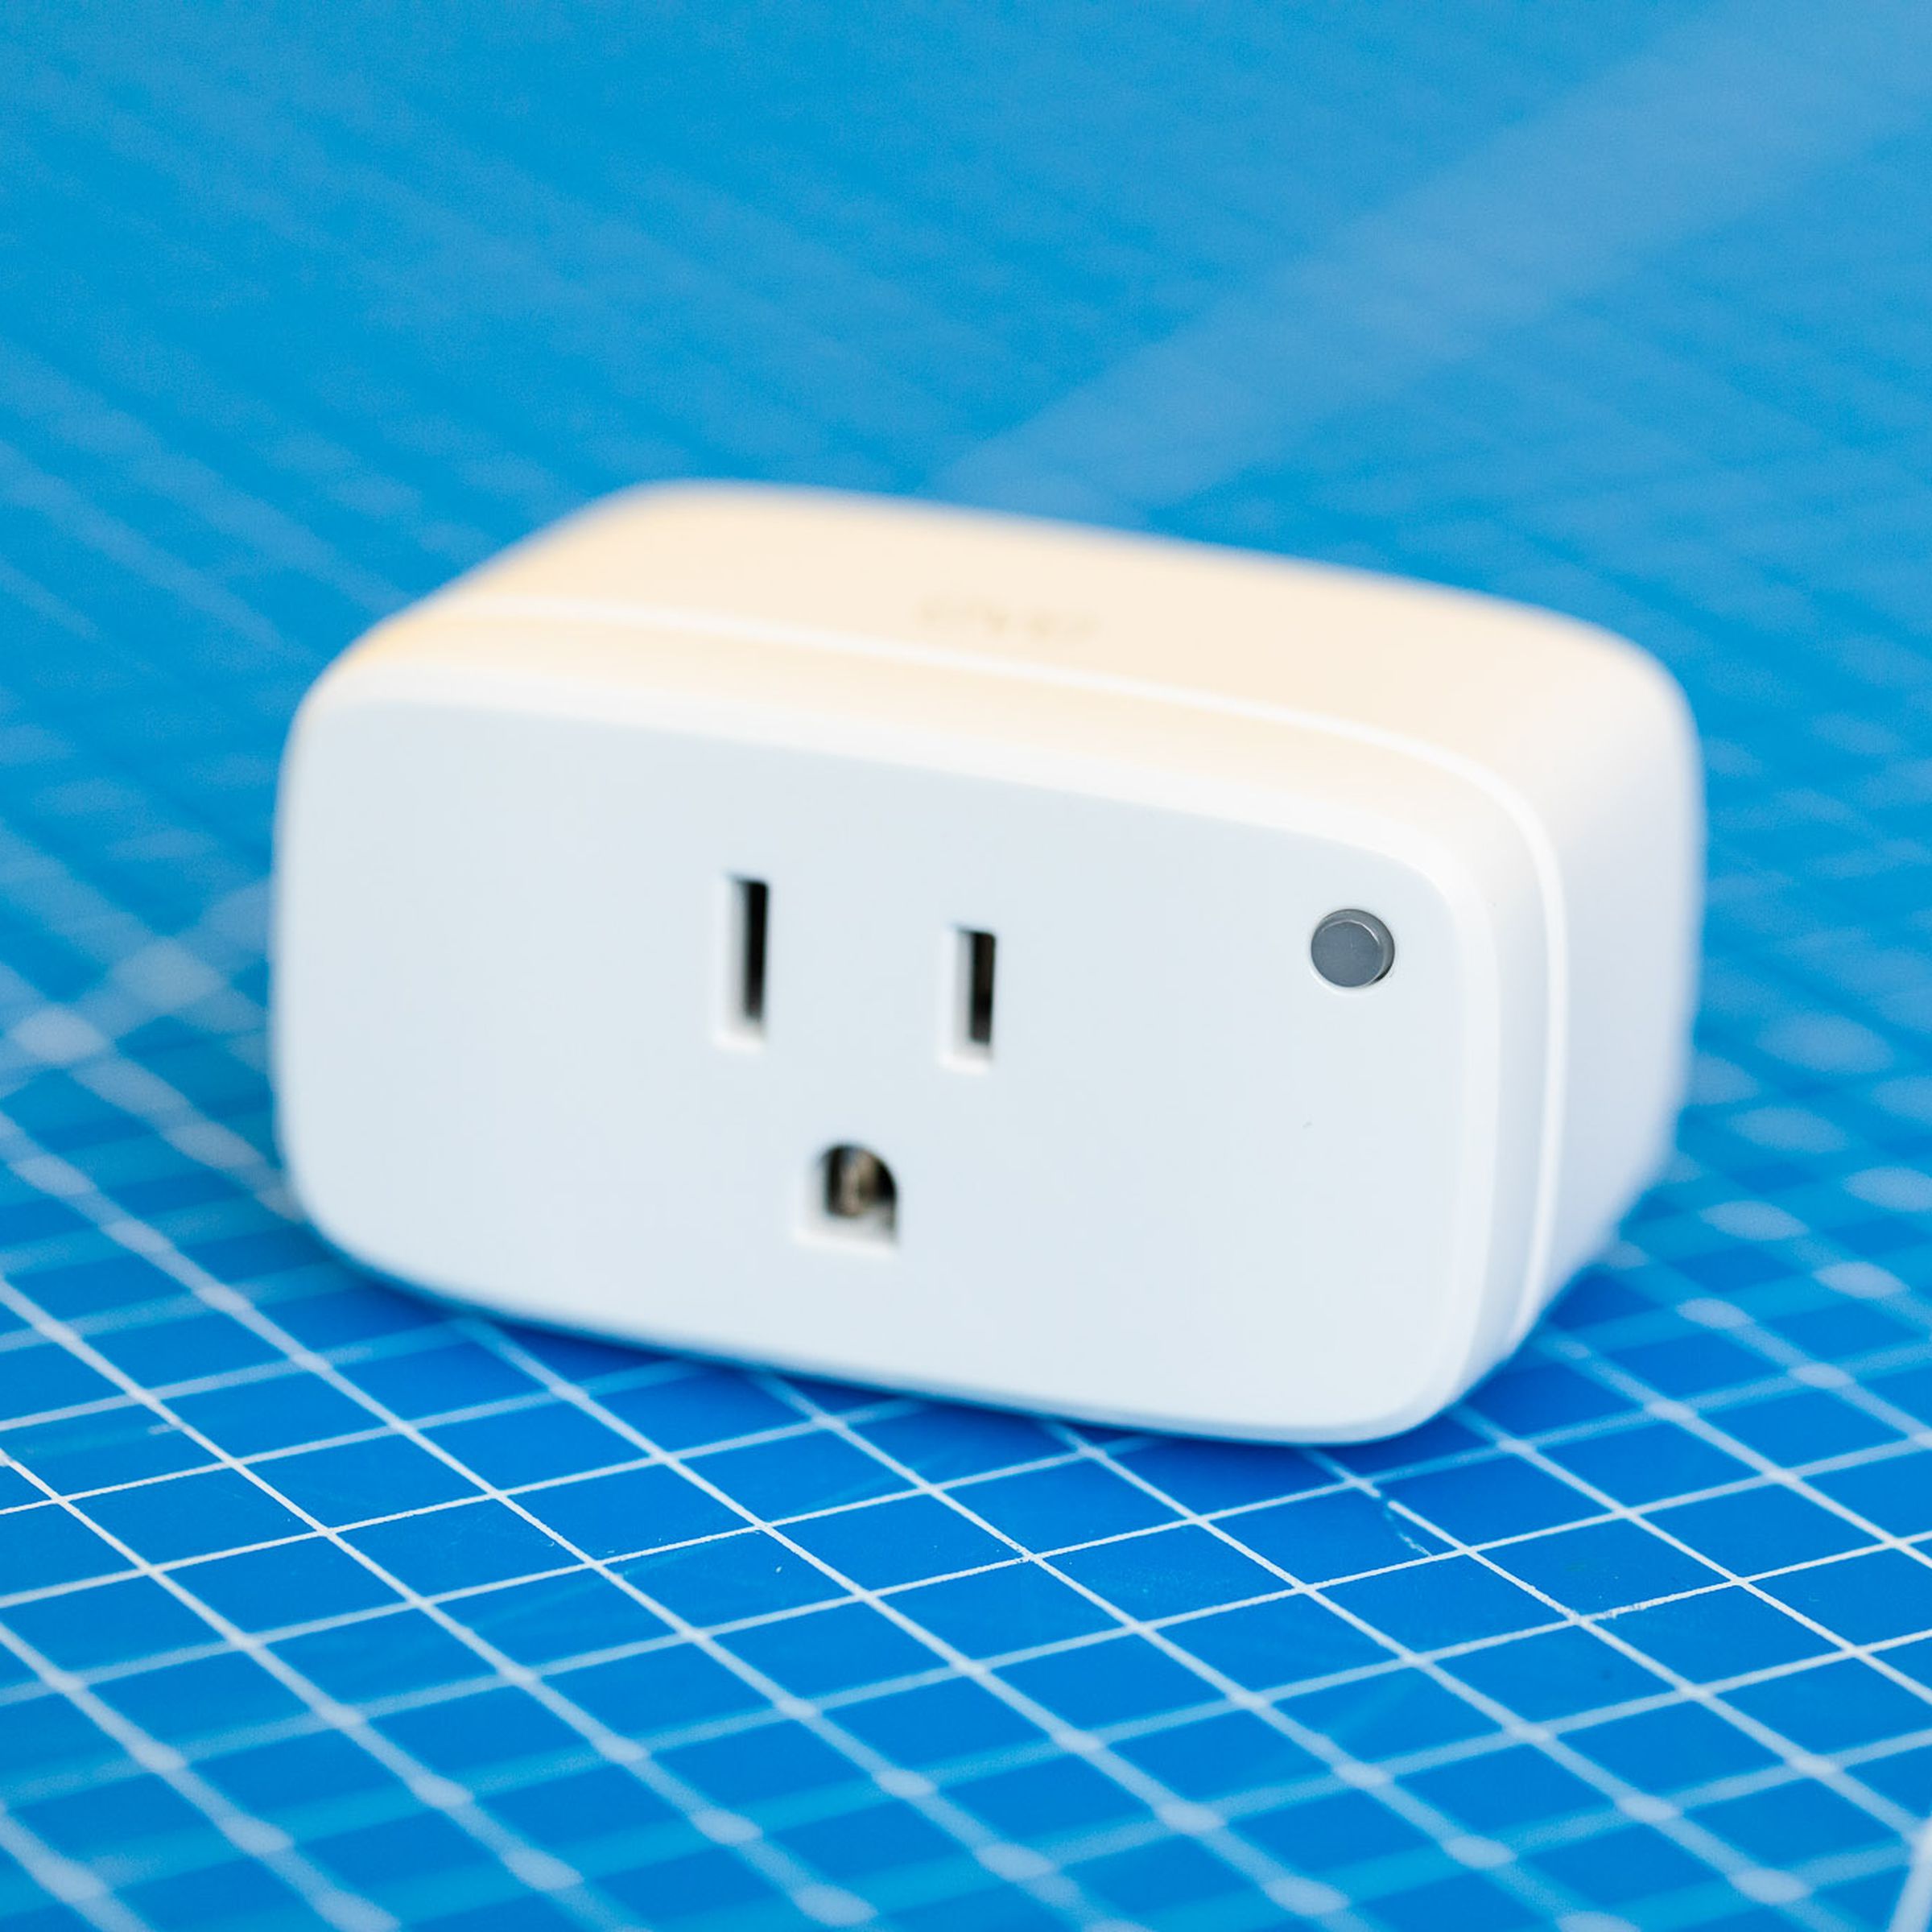 Eve Energy smart plug. A white rectangular prism with the broad face front. The corners and edges are rounded, there is a three-prong outlet on the front and a green LED on the upper-right corner of the front face. It sits on a blue background with a grid of white lines.